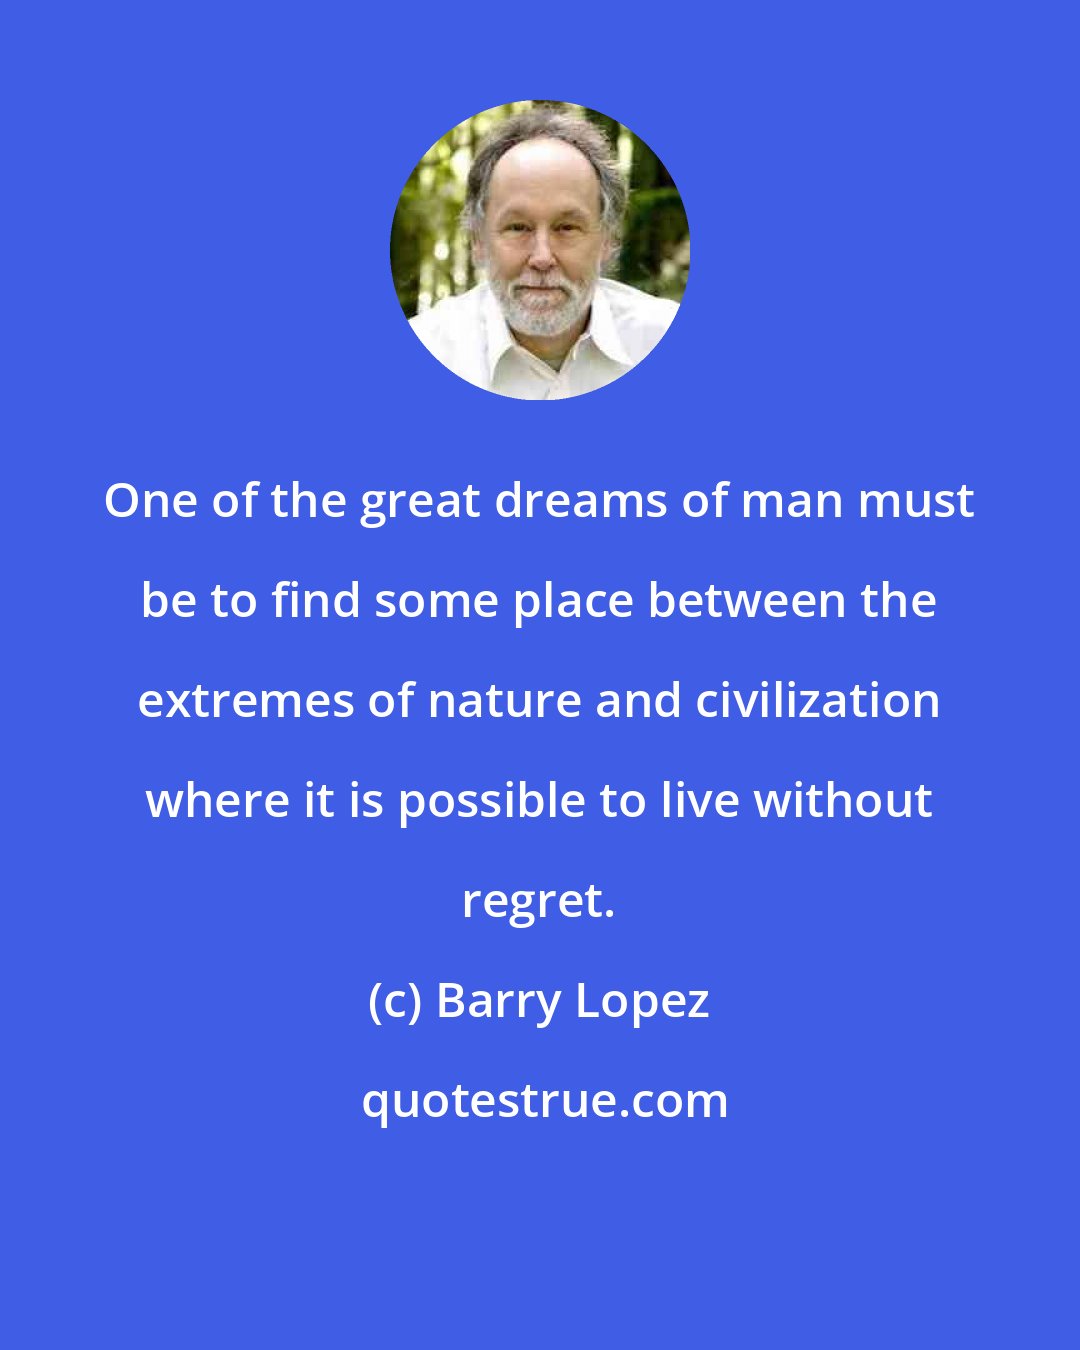 Barry Lopez: One of the great dreams of man must be to find some place between the extremes of nature and civilization where it is possible to live without regret.